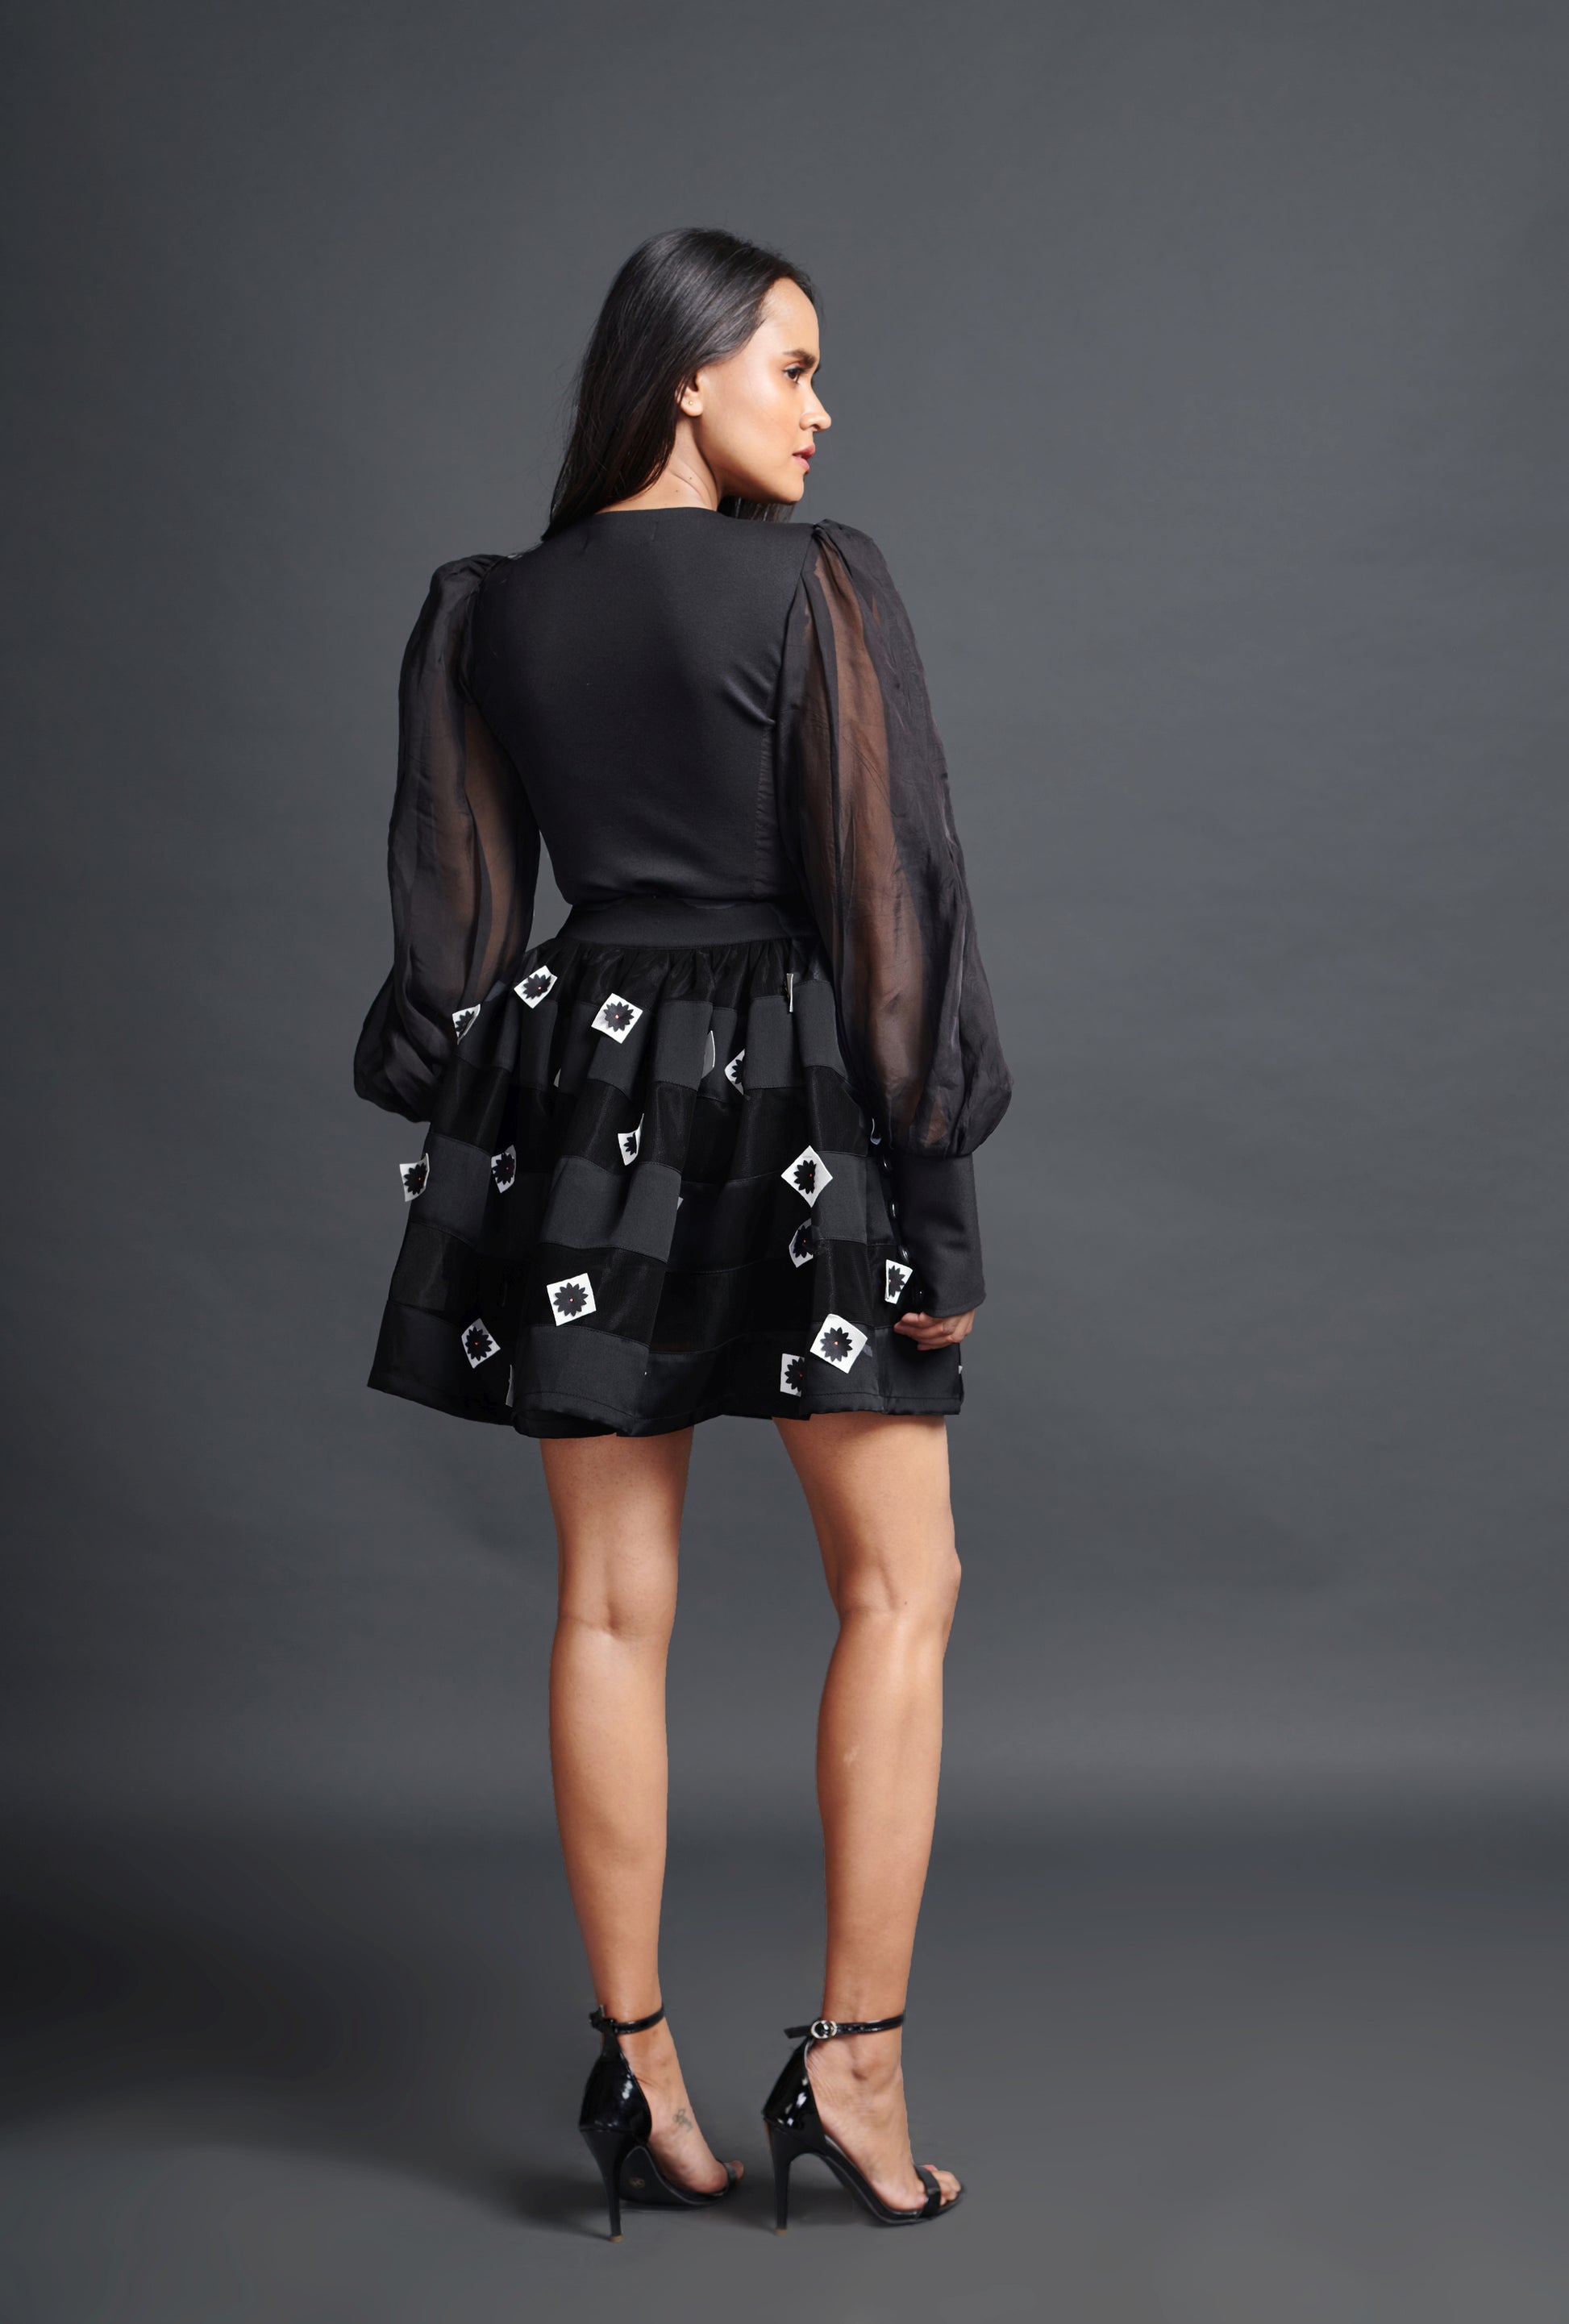 mage of BLACK ORGANZA CO-ORD SHORT SKIRT SET WITH CONFETTI ON SKIRT. From savoirfashions.com